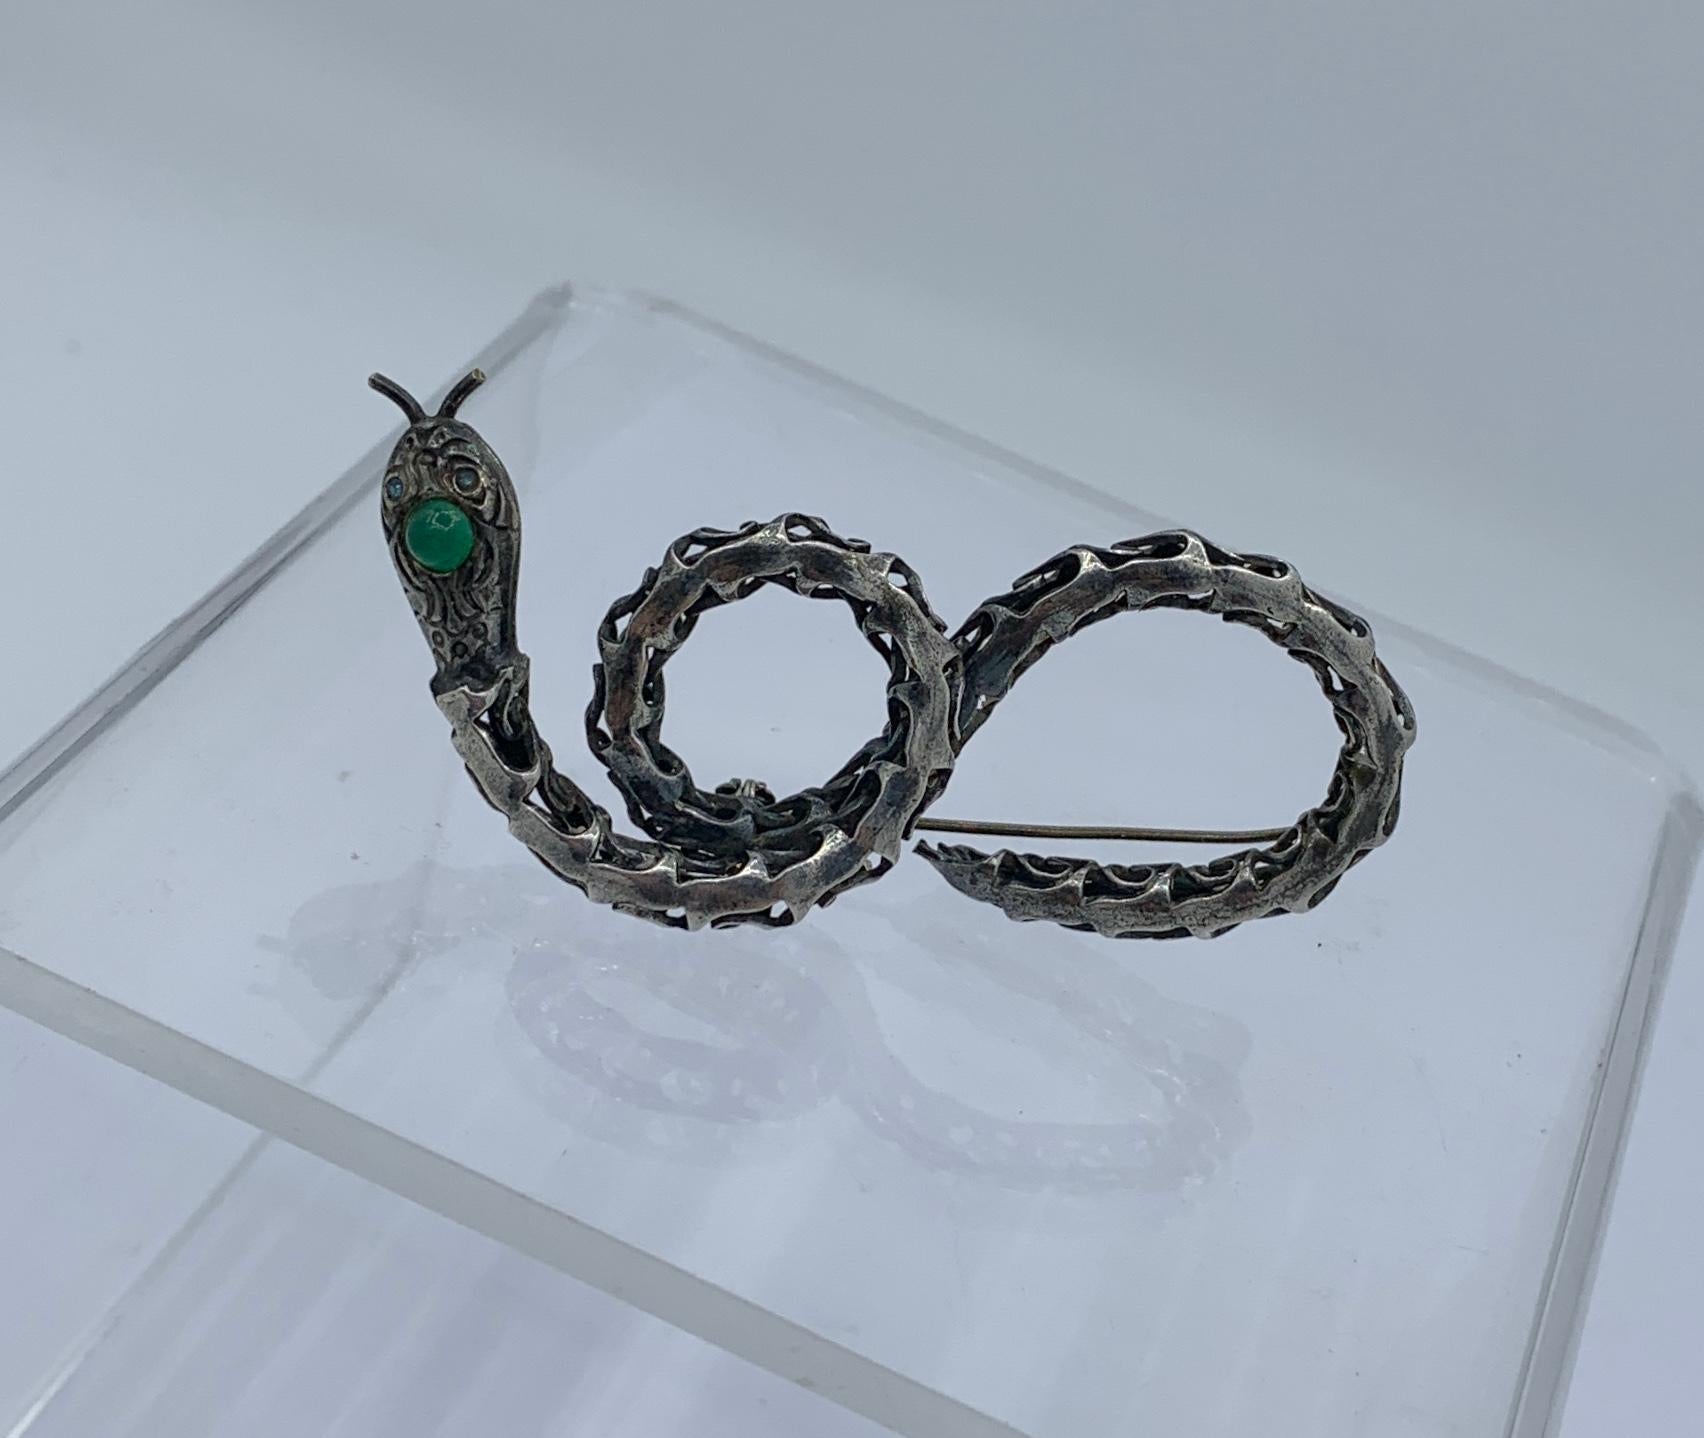 THIS IS A STUNNING ANTIQUE SNAKE BROOCH IN THE FORM OF A CURLING SNAKE IN FINE SILVER IN AN OPEN WORK DESIGN.  THE HEAD AND EYES OF THE SNAKE ARE SET WITH GREEN CHRYSOPHRASE GEMS.
The snake brooch has wonderful design and Art Deco - Mid-Century